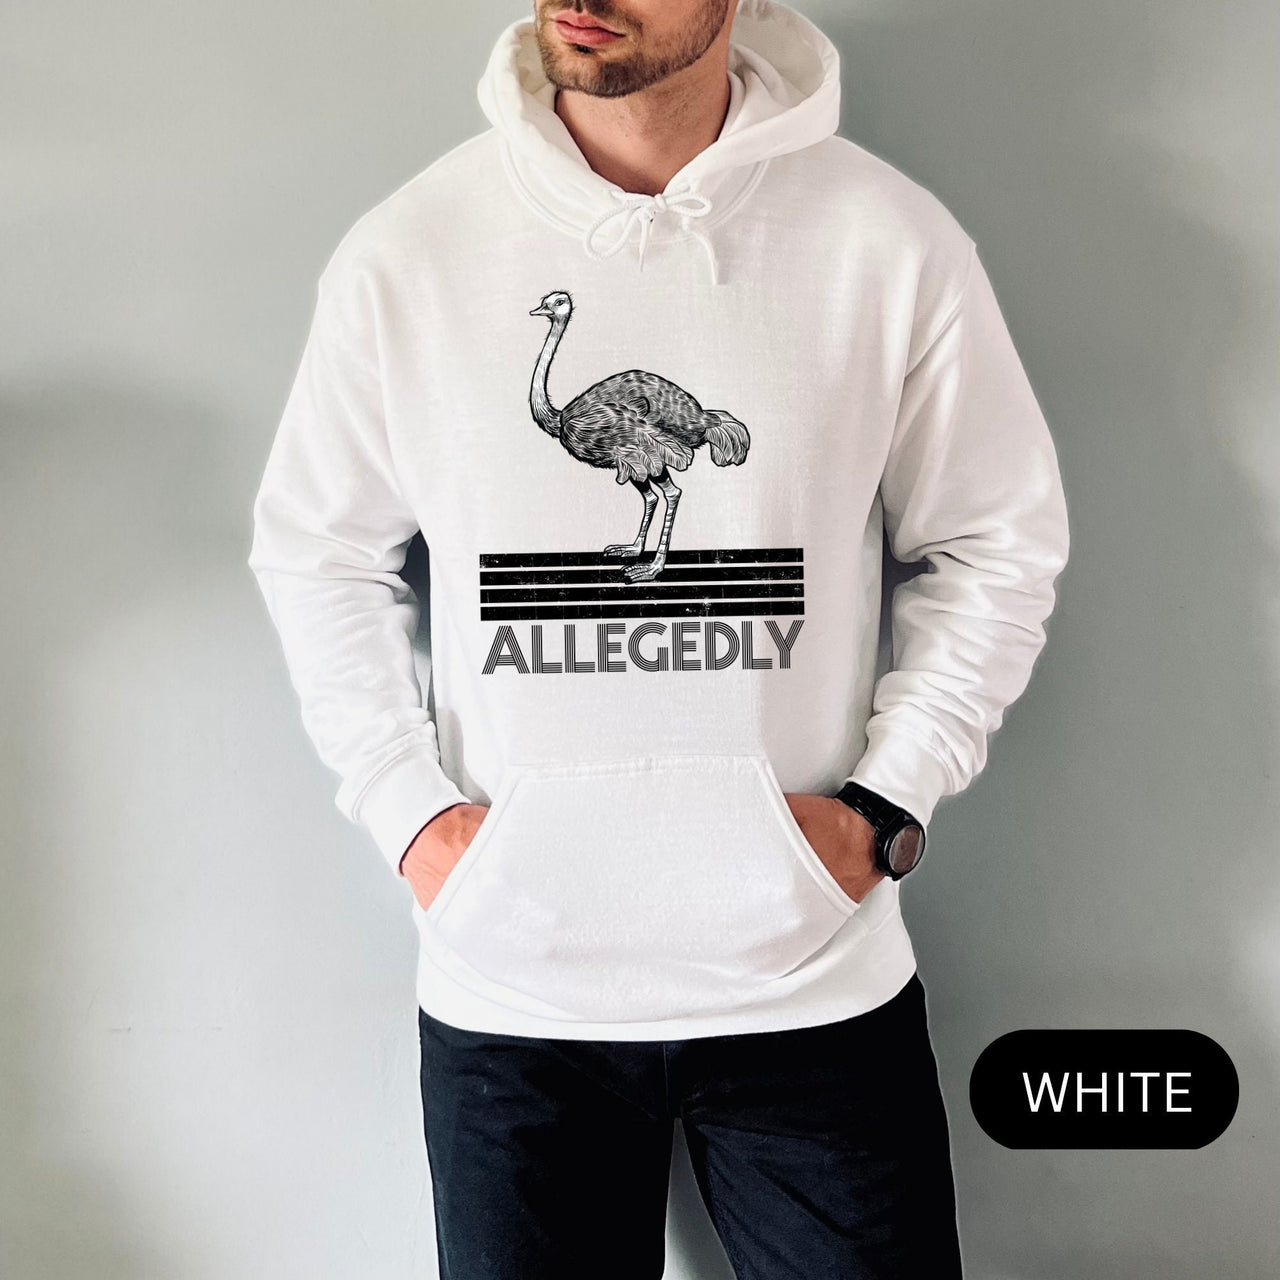 High Quality Allegedly Hoodie